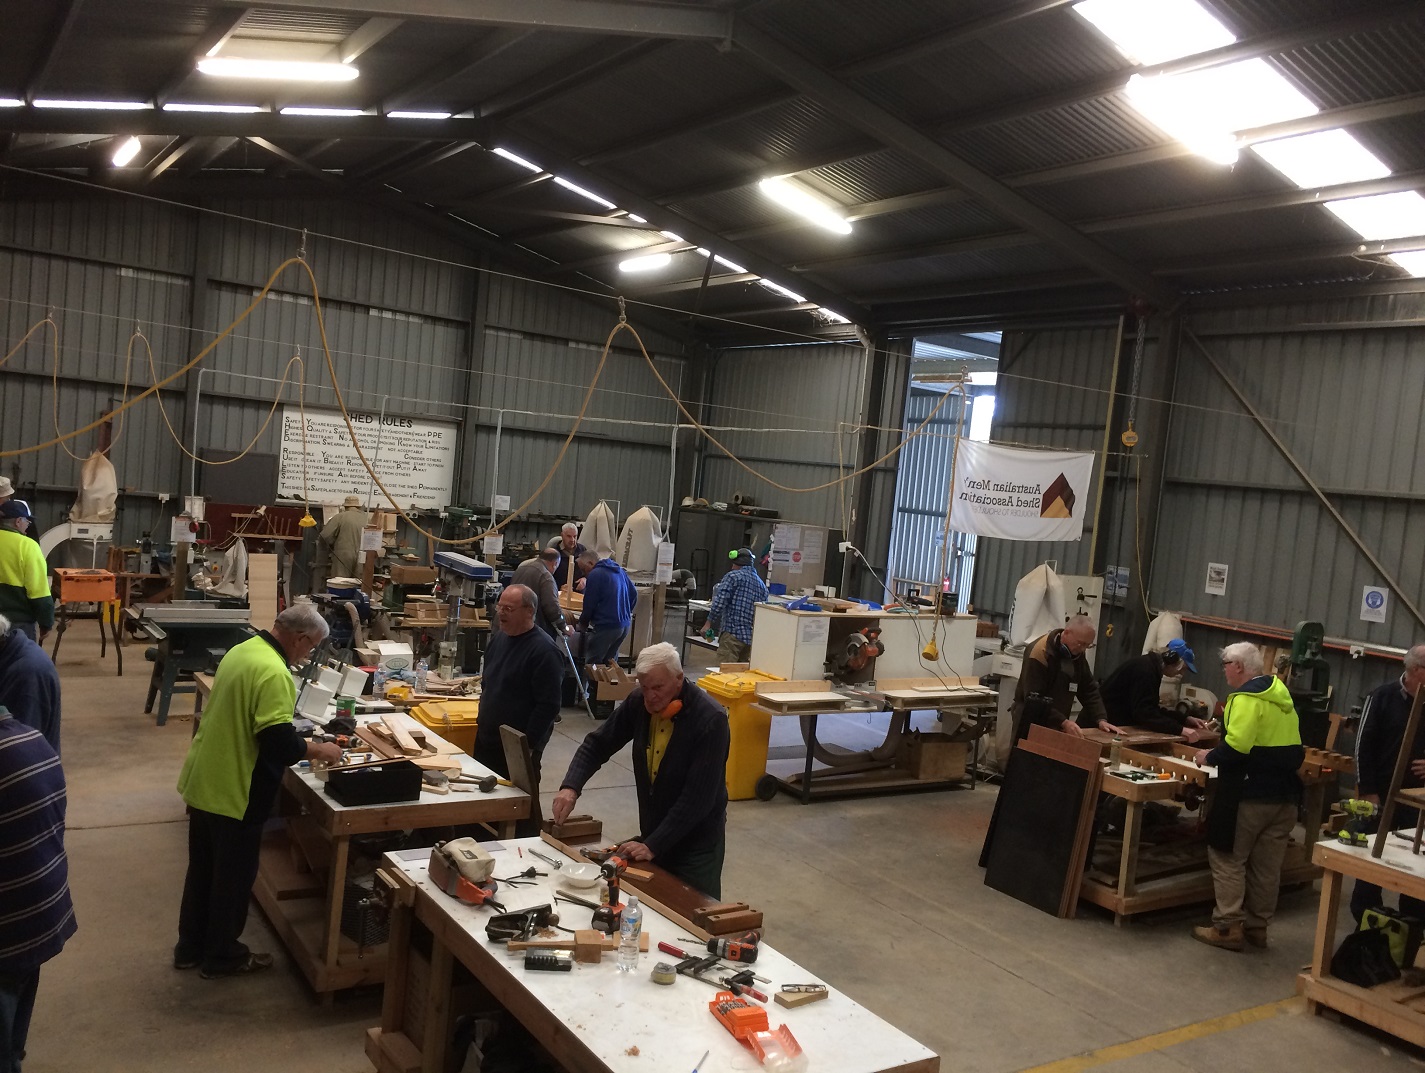 MEN'S SHED | Ingle Farm Corps | The Salvation Army Australia